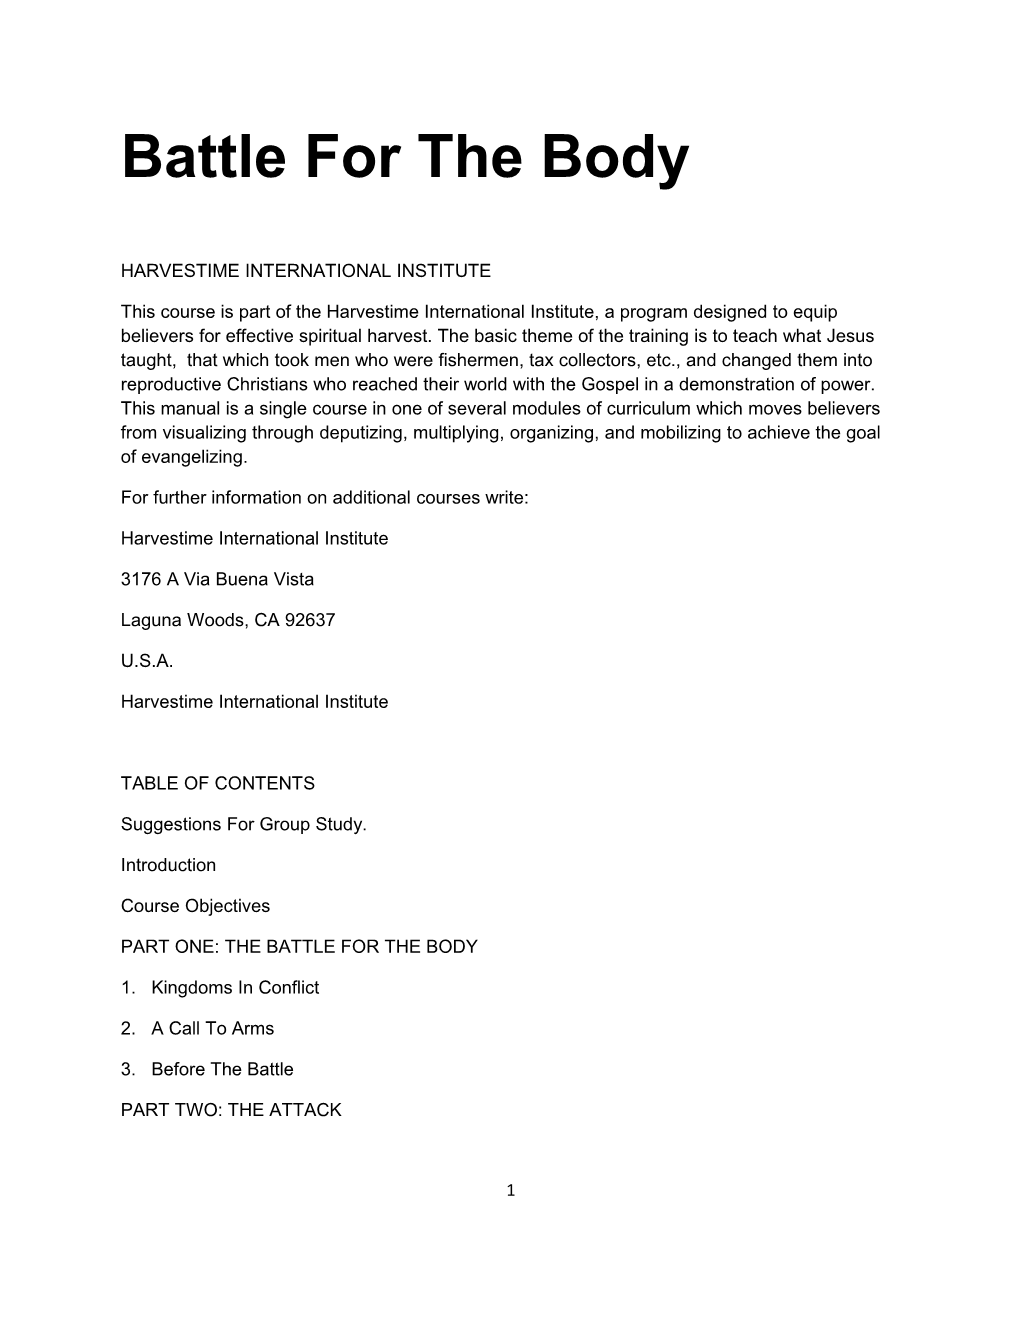 Battle for the Body